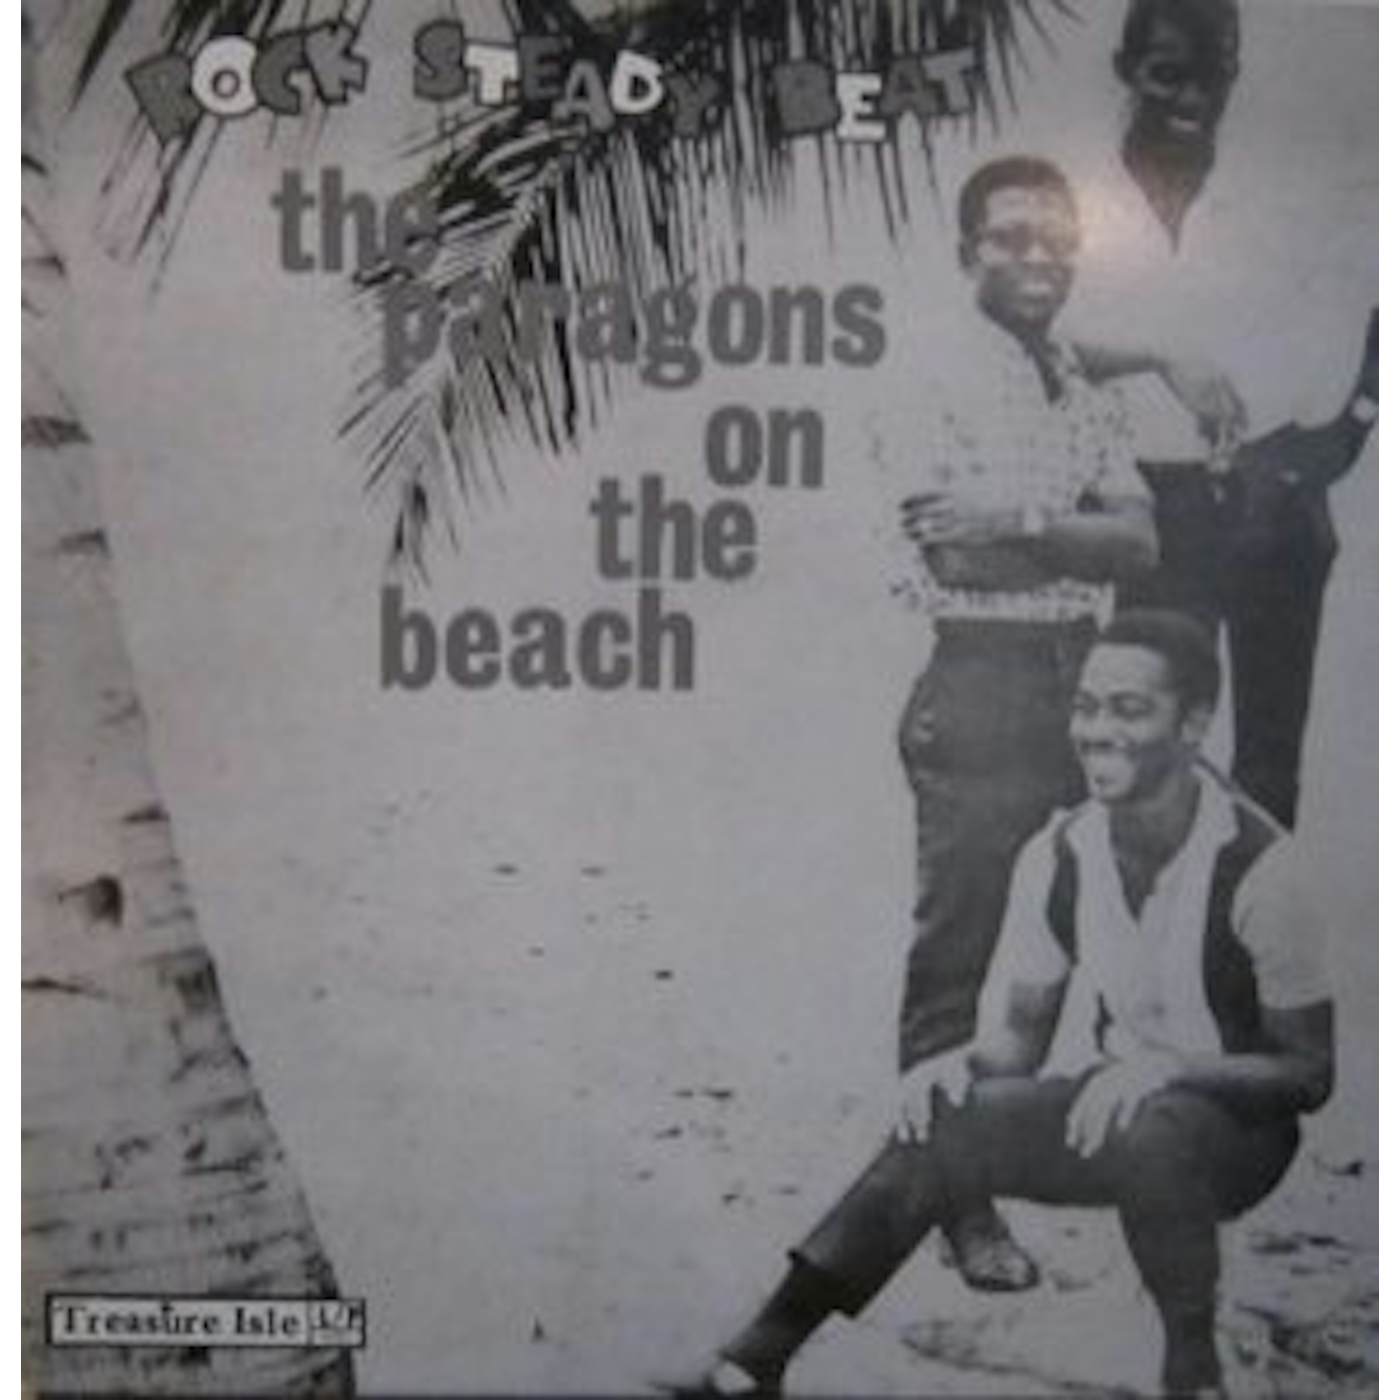 The Paragons On The Beach Vinyl Record